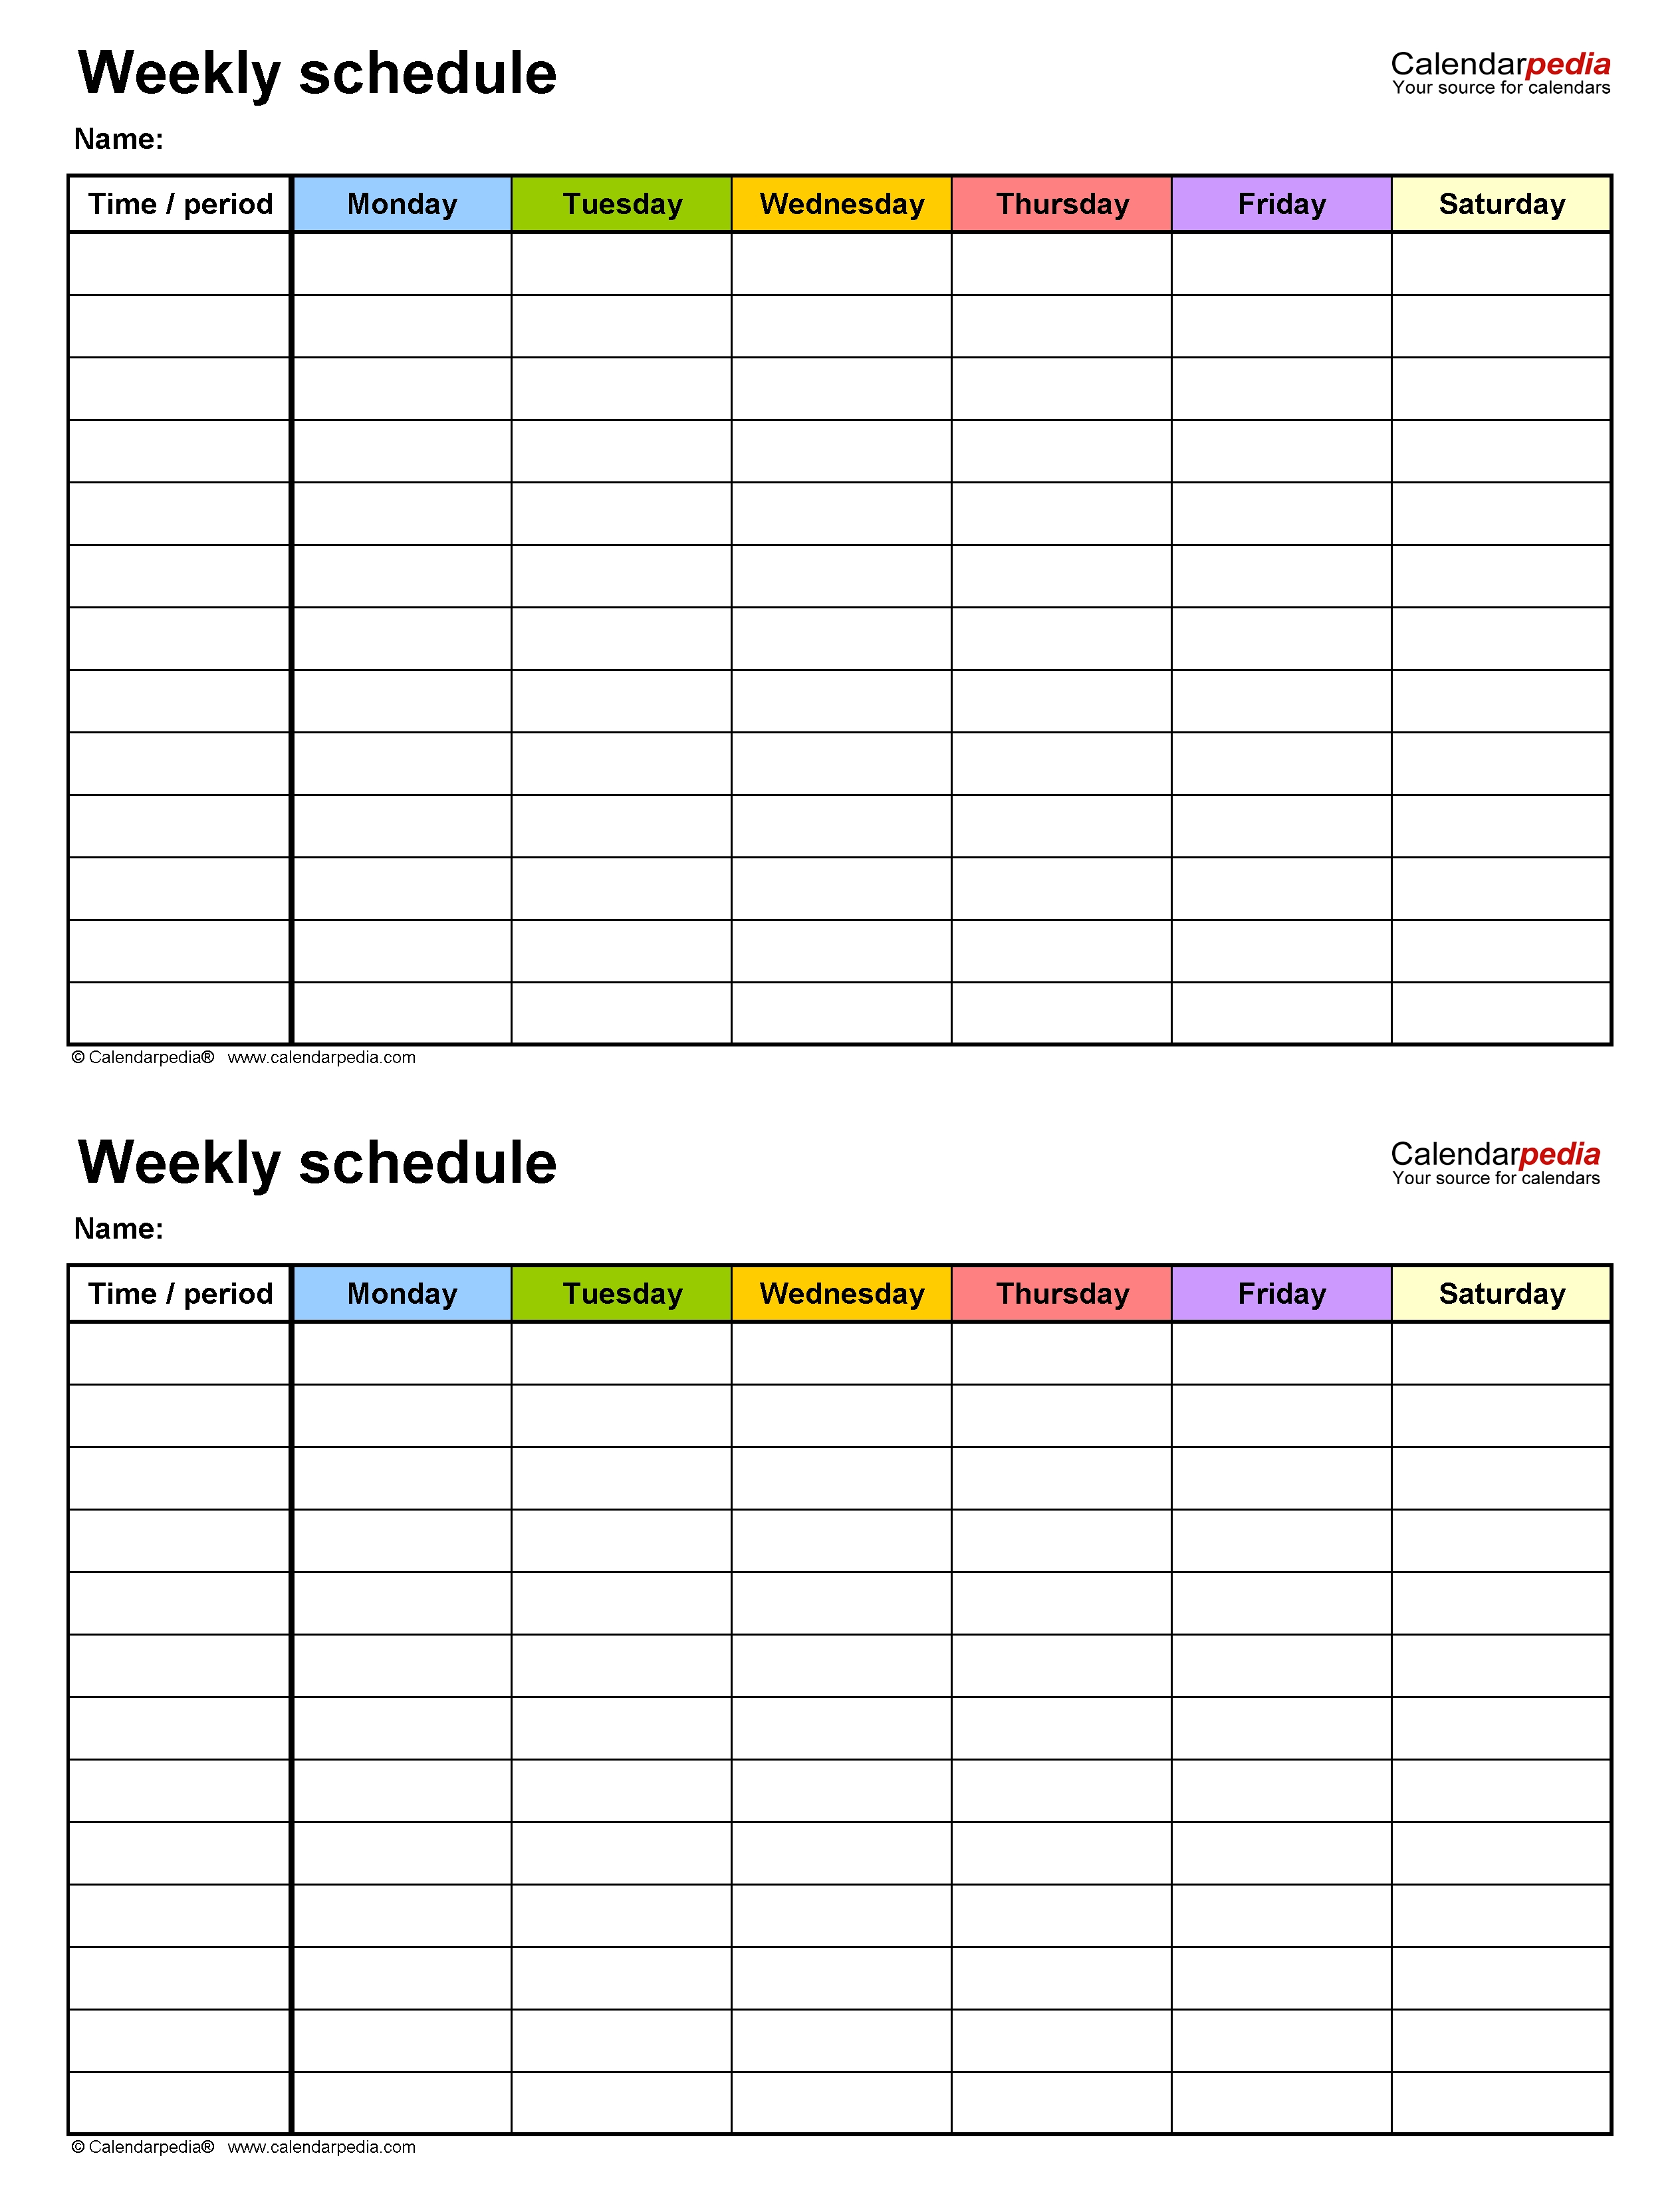 Free Weekly Schedules For Excel - 18 Templates 1 Week Calendar Template Excel